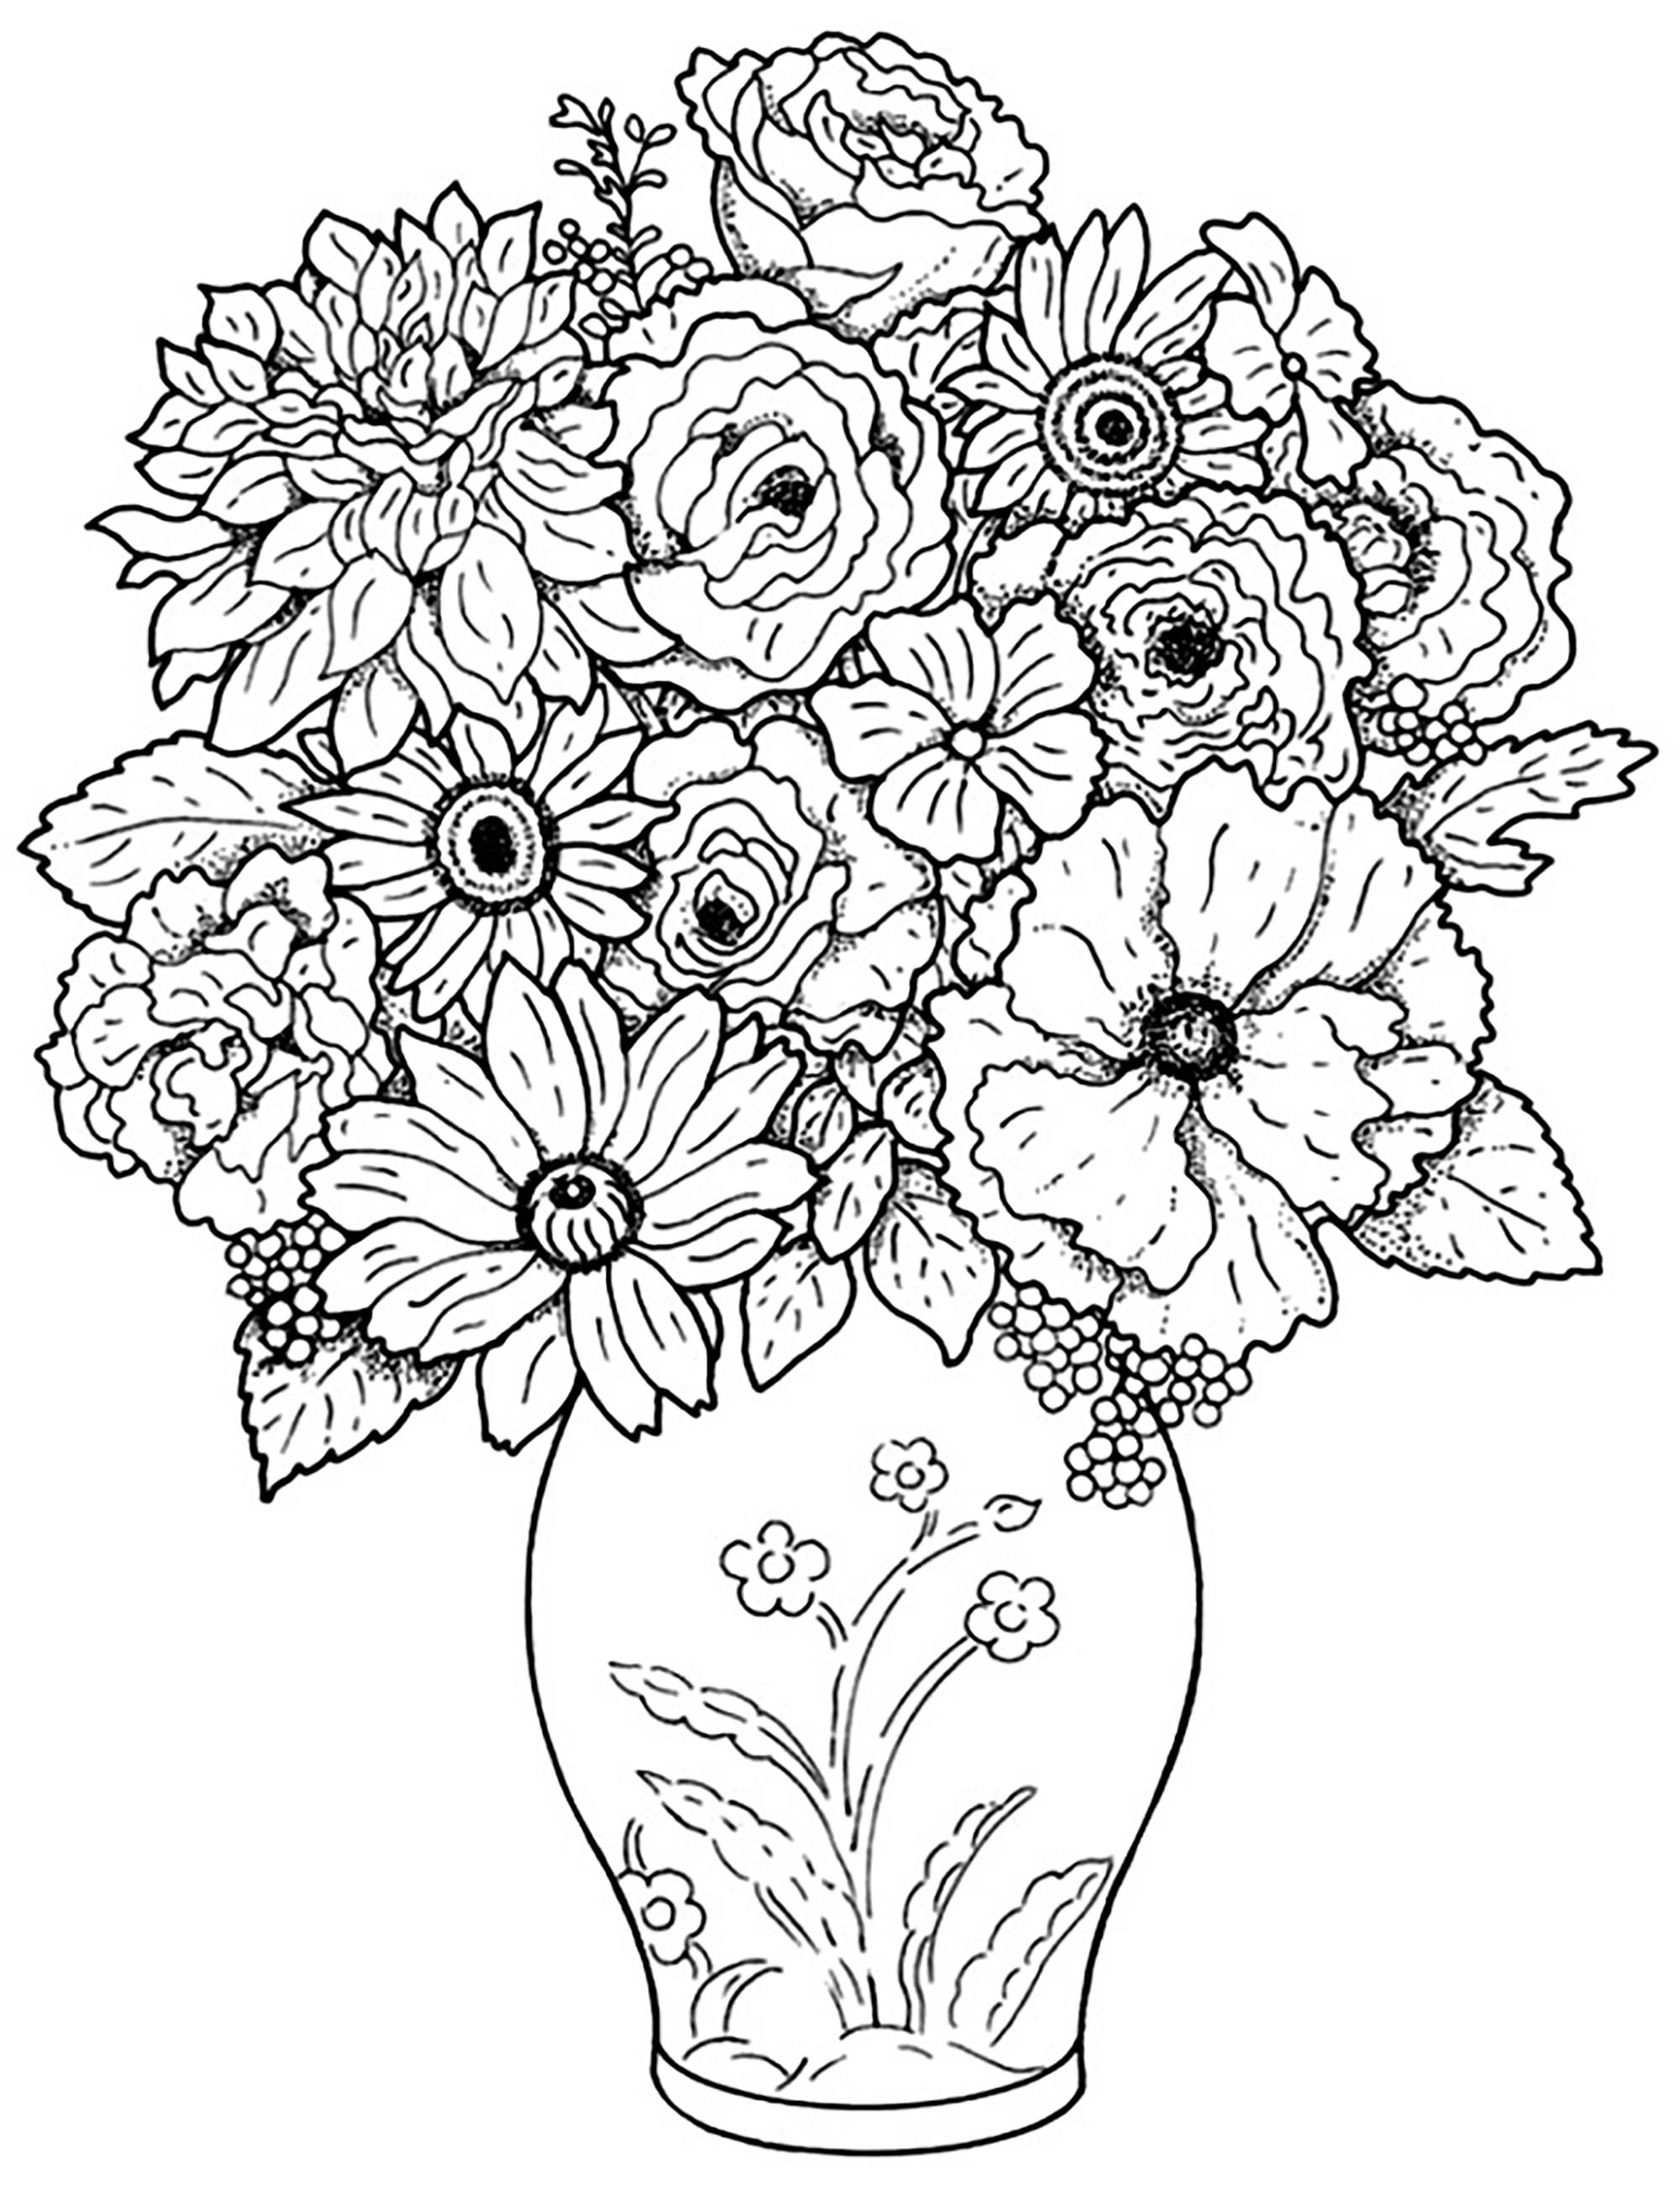 Flower bouquet - Flowers Kids Coloring Pages